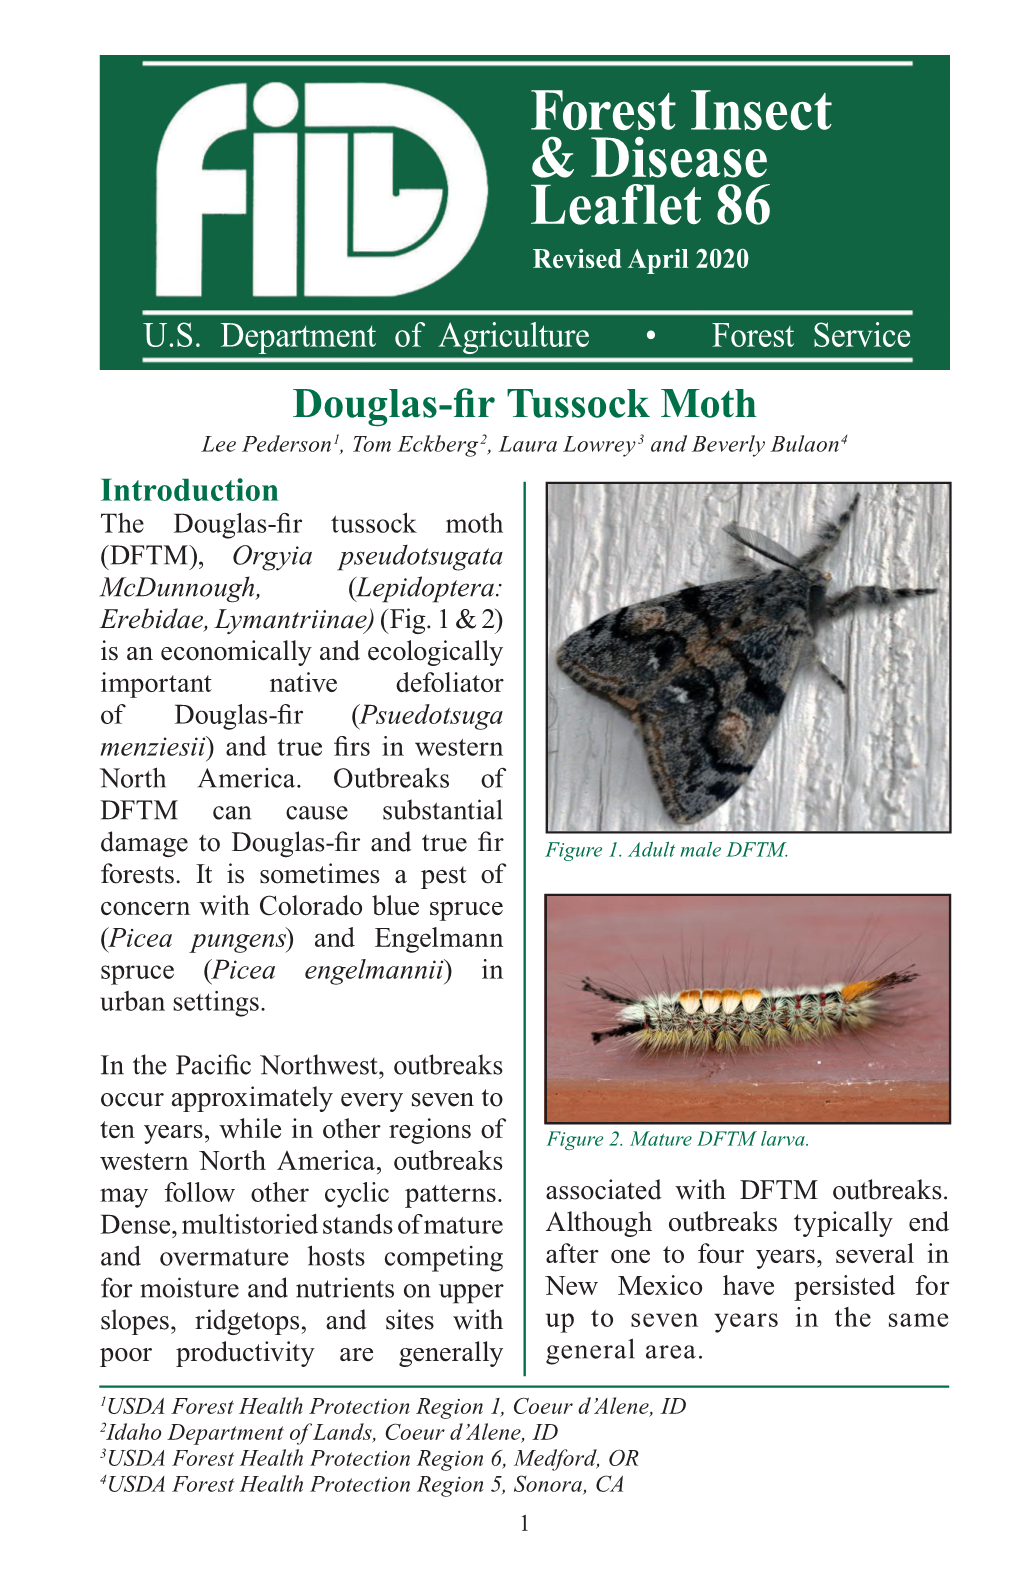 Forest Insect & Disease Leaflet